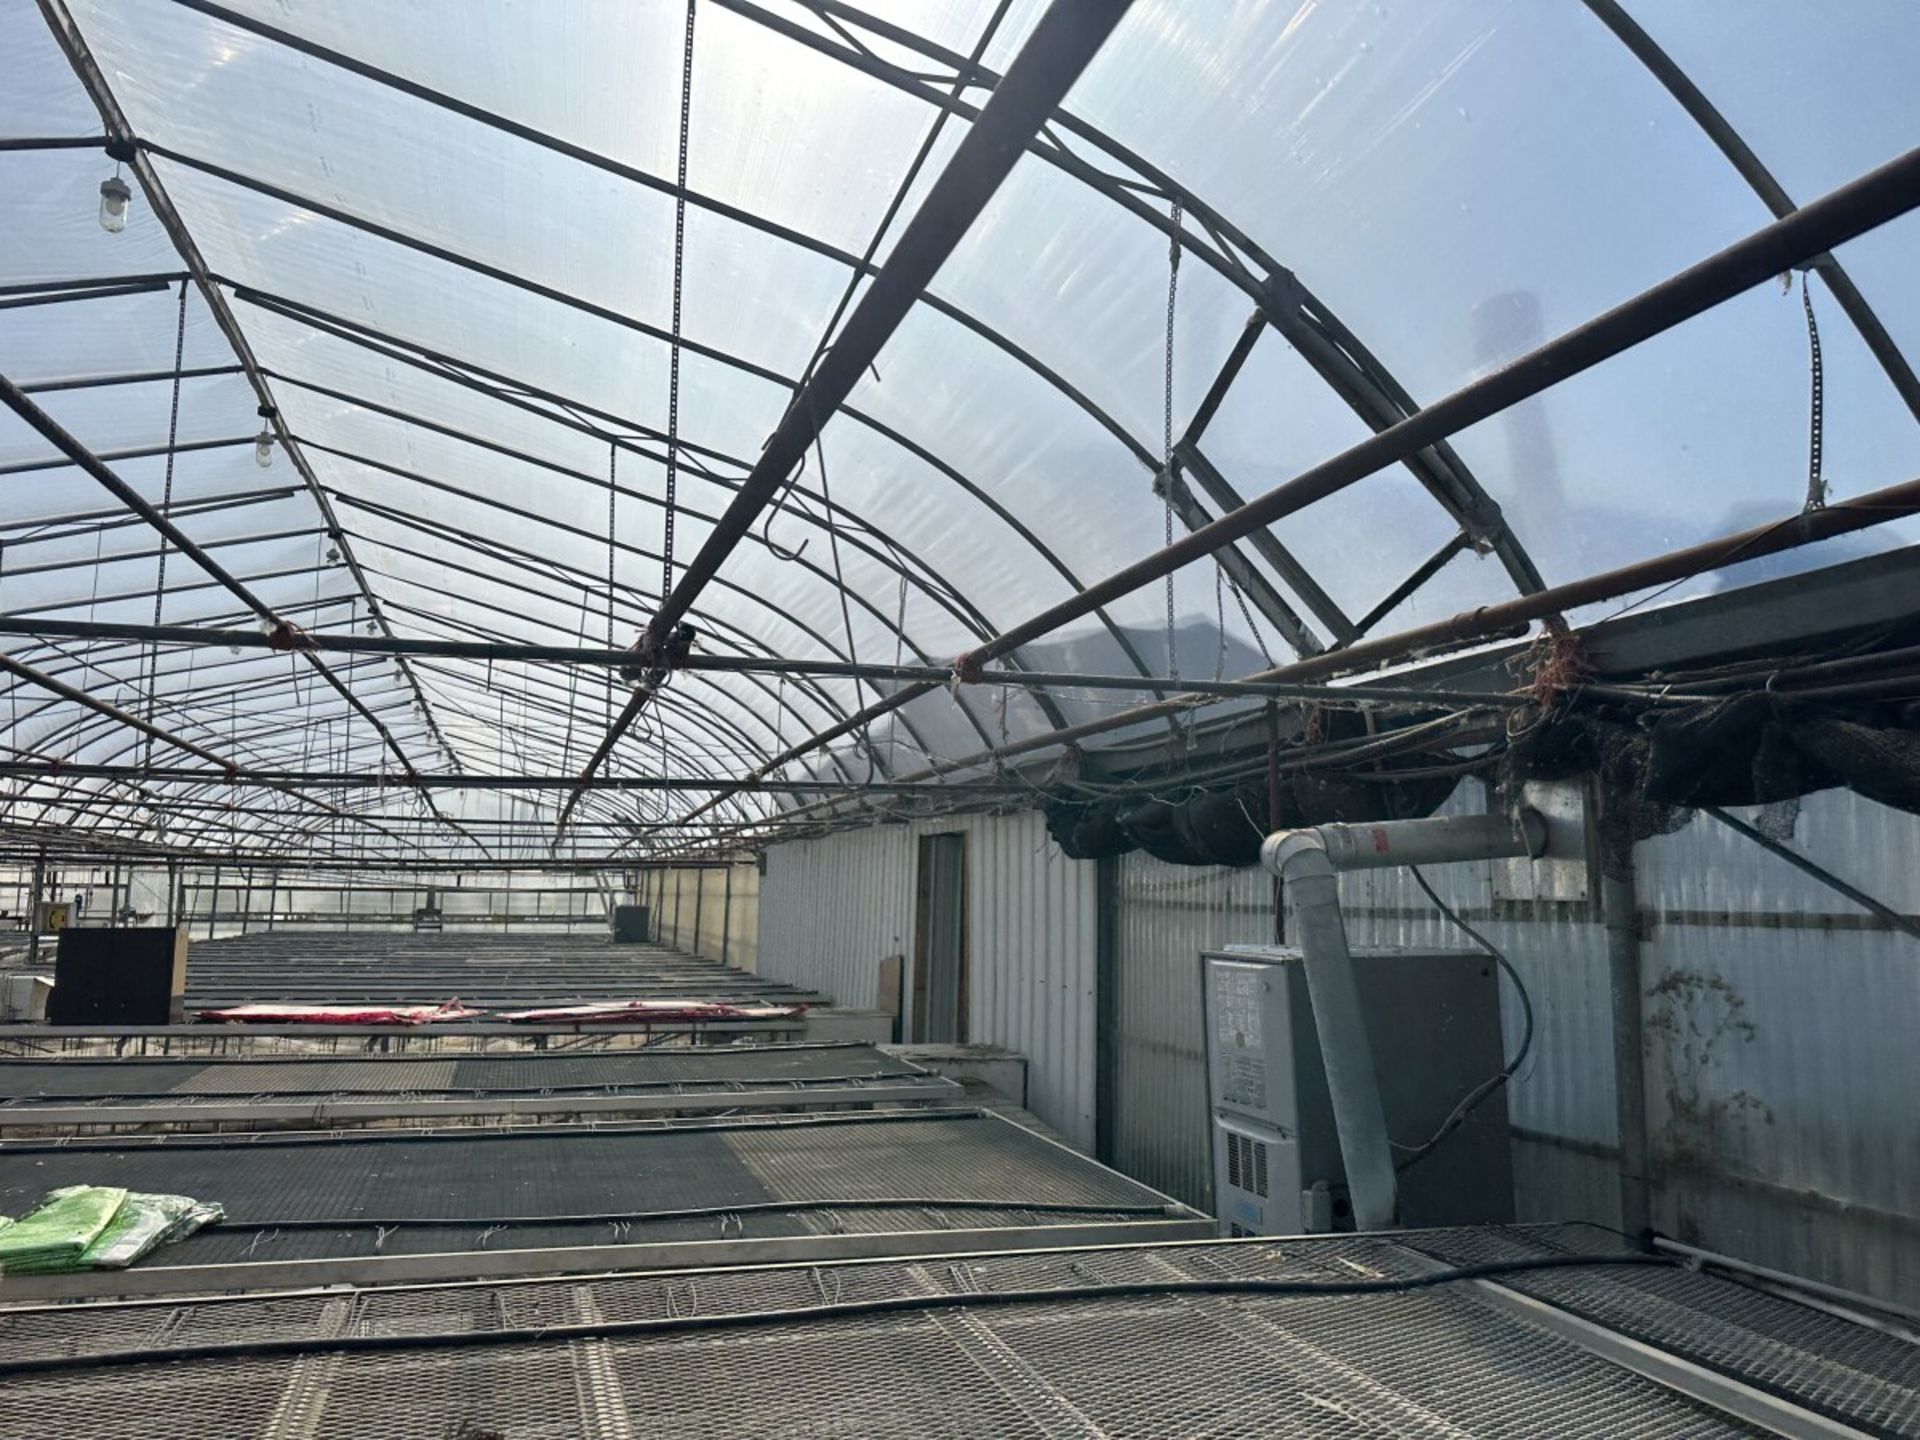 WESTBROOK GUTTER CONNECT 2-BAY GREENHOUSE 60FT X 144FT X 96” H & 2-BAY 60FT X 72 FT X 96”, INCLUDING - Image 46 of 95